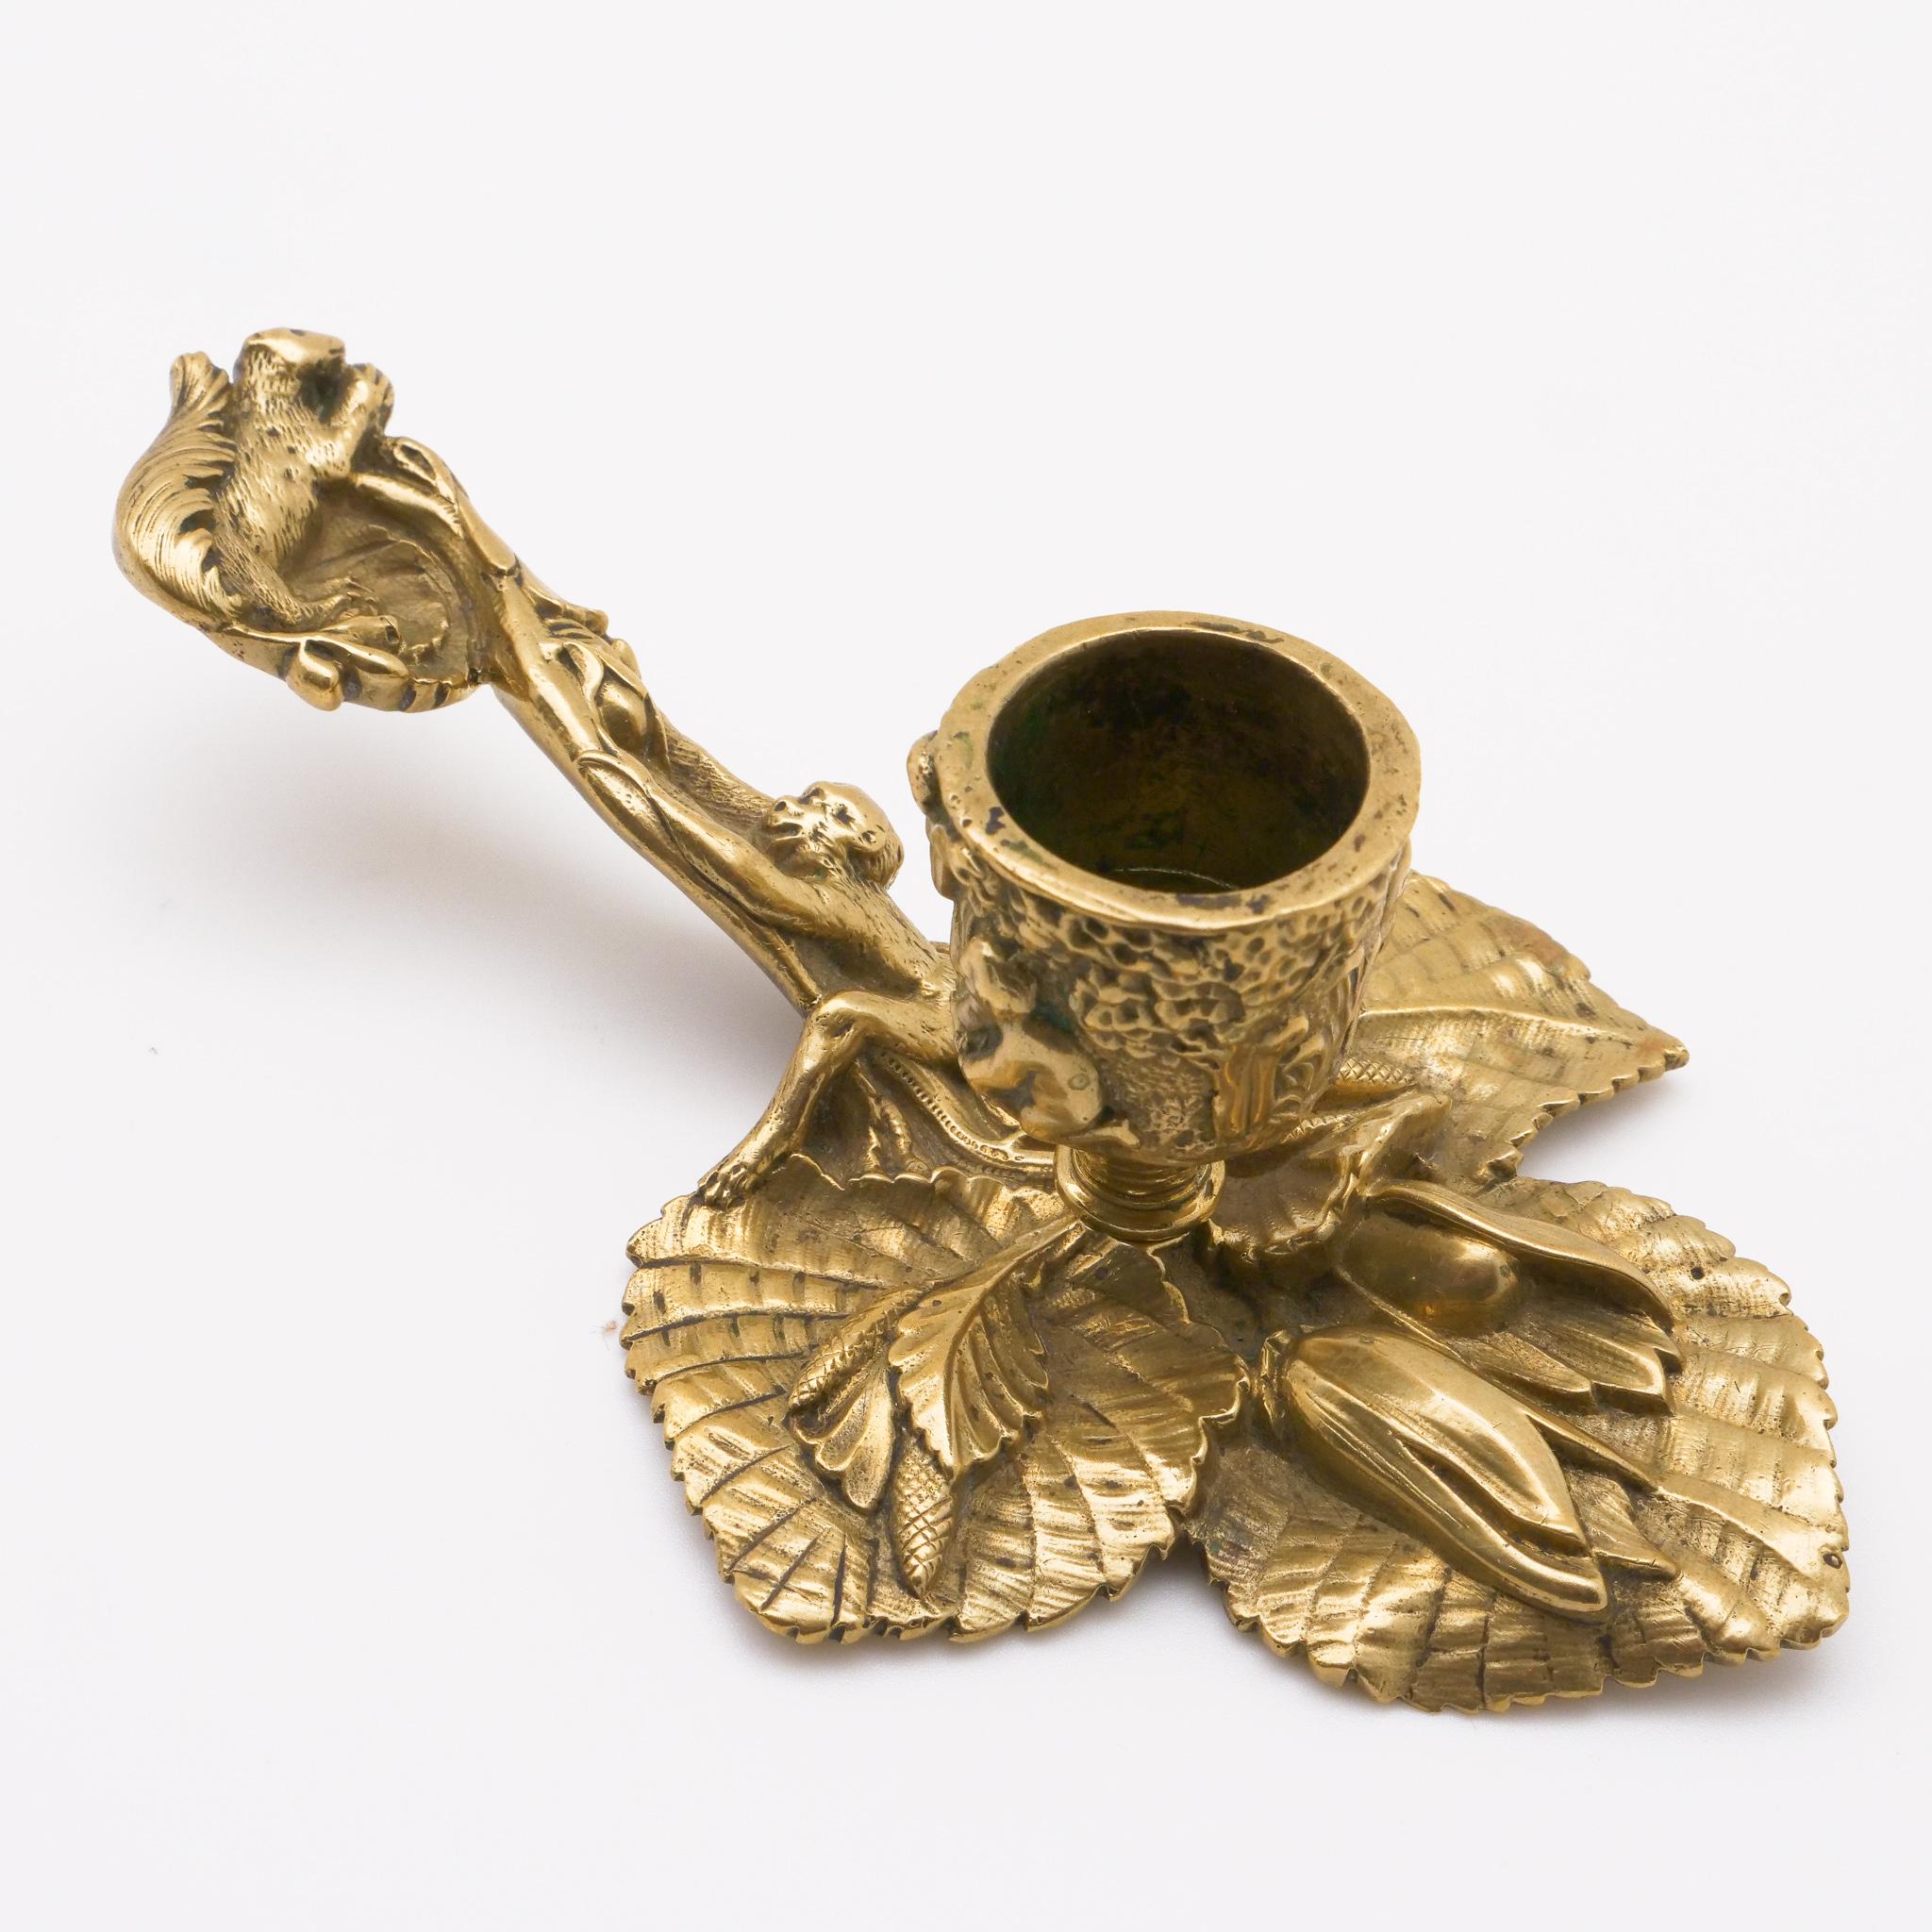 Art Nouveau gilt bronze chamberstick or candleholder, early 20th century, French.